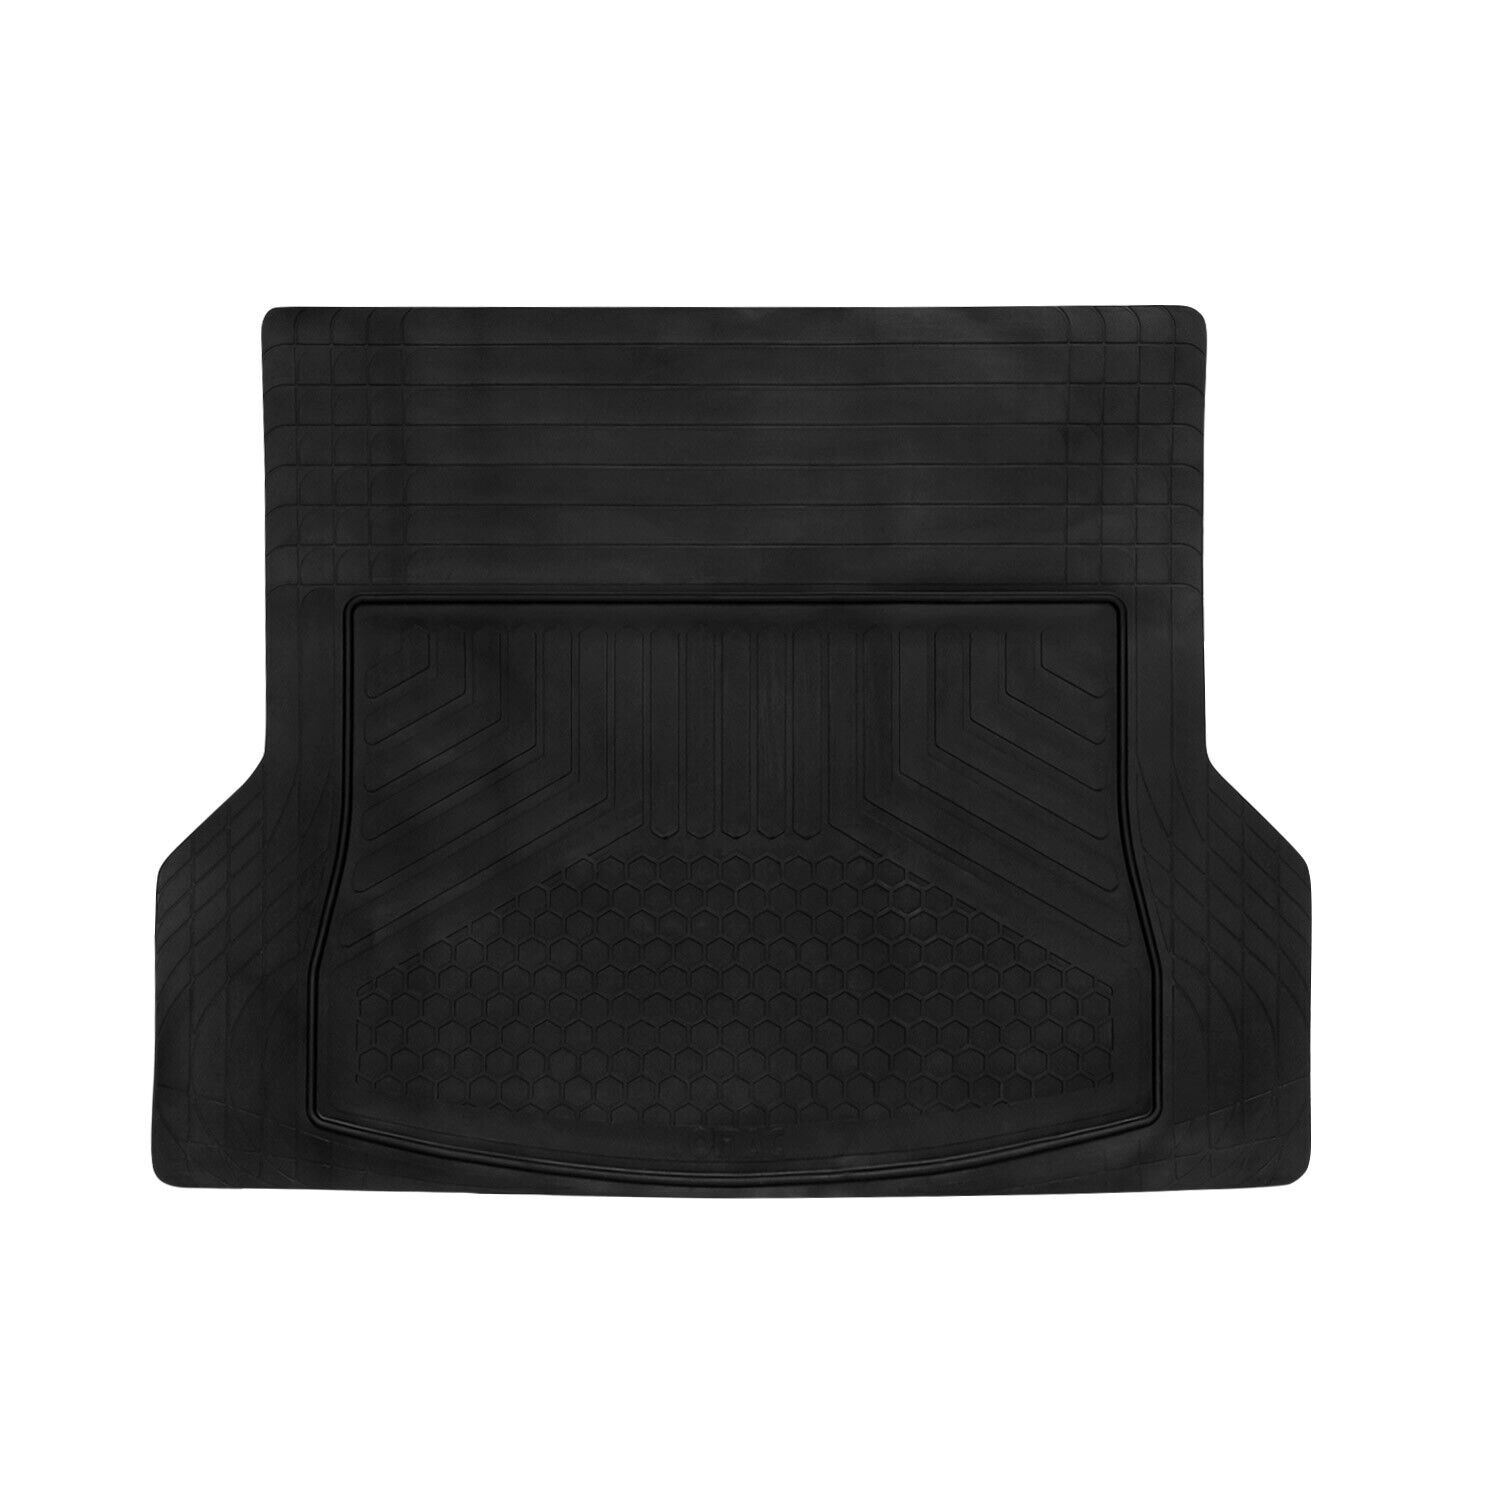 Trimmable Trunk Cargo Mats Liner Waterproof for Tesla Black 1Pc